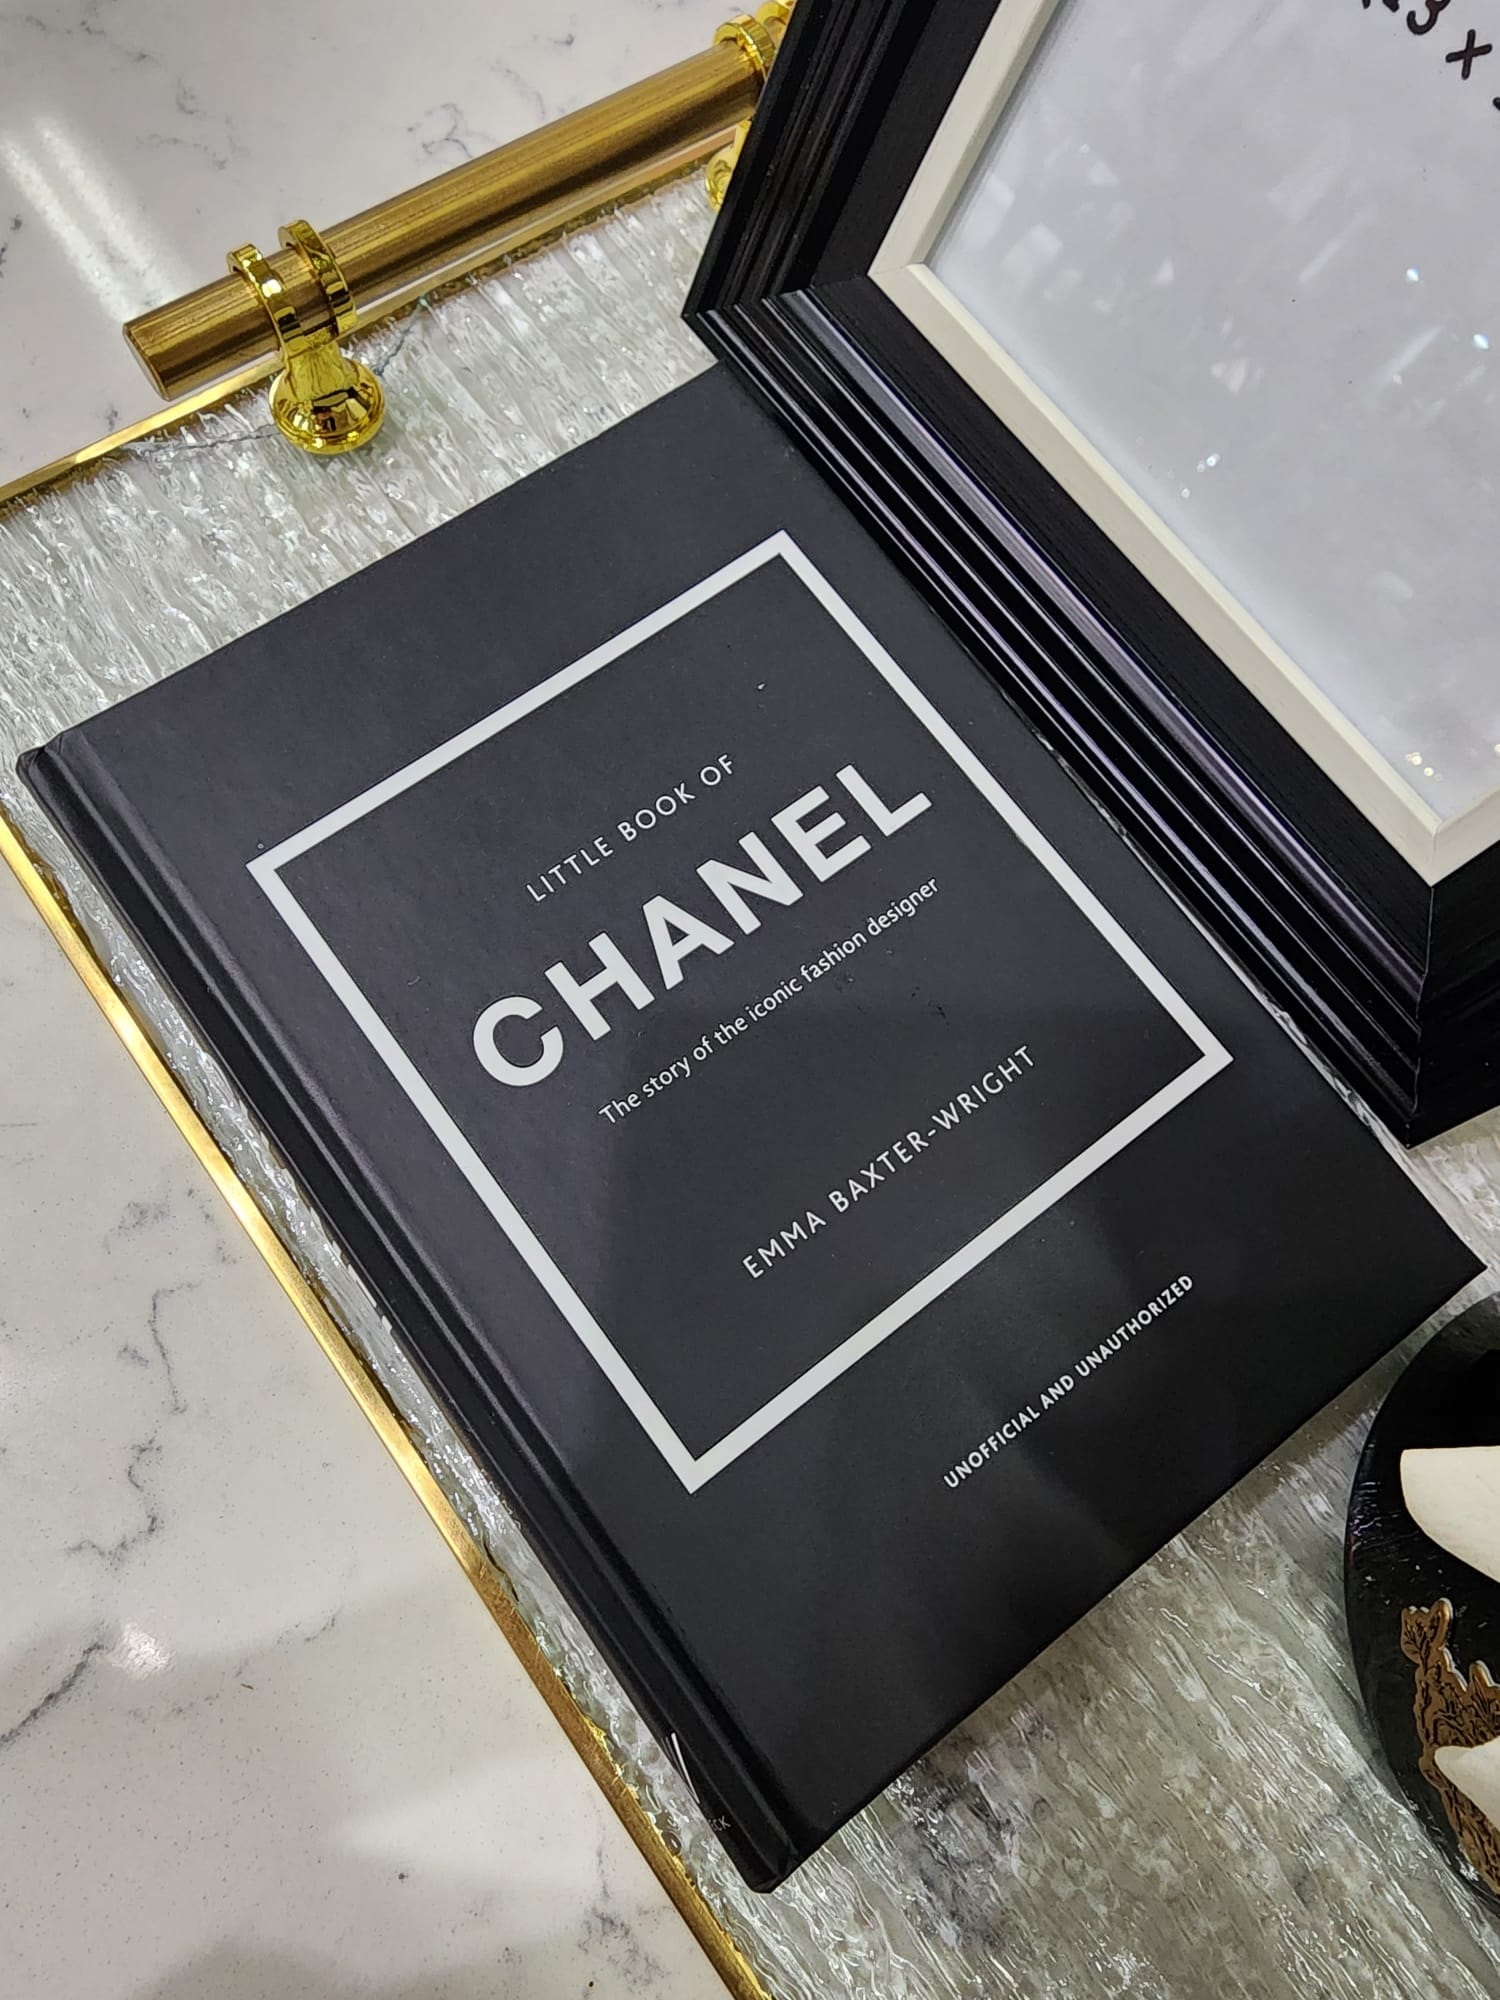 the little book of chanel